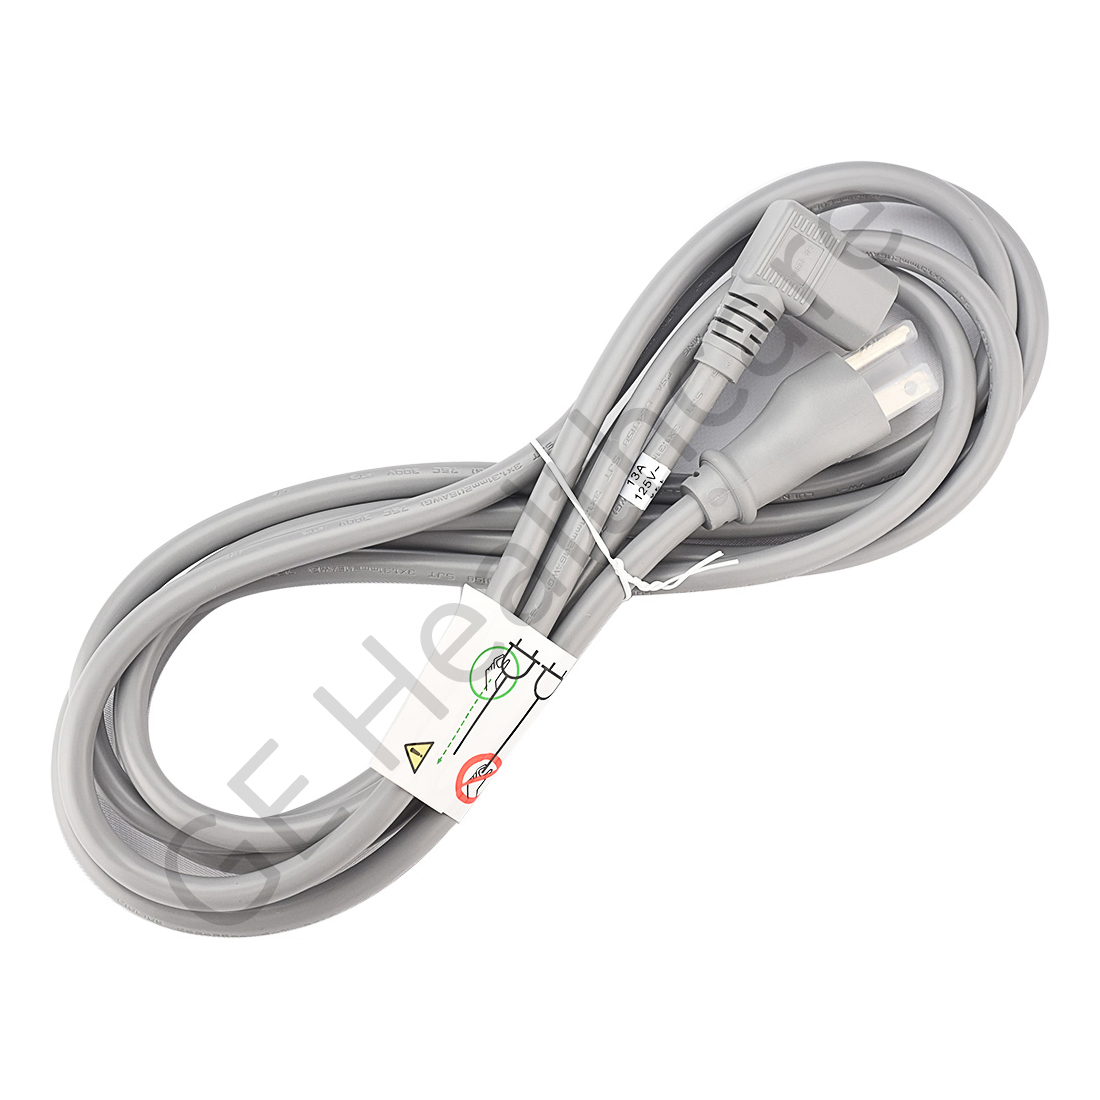 cable sum energia ra hosp grd 10a 125v 10ft